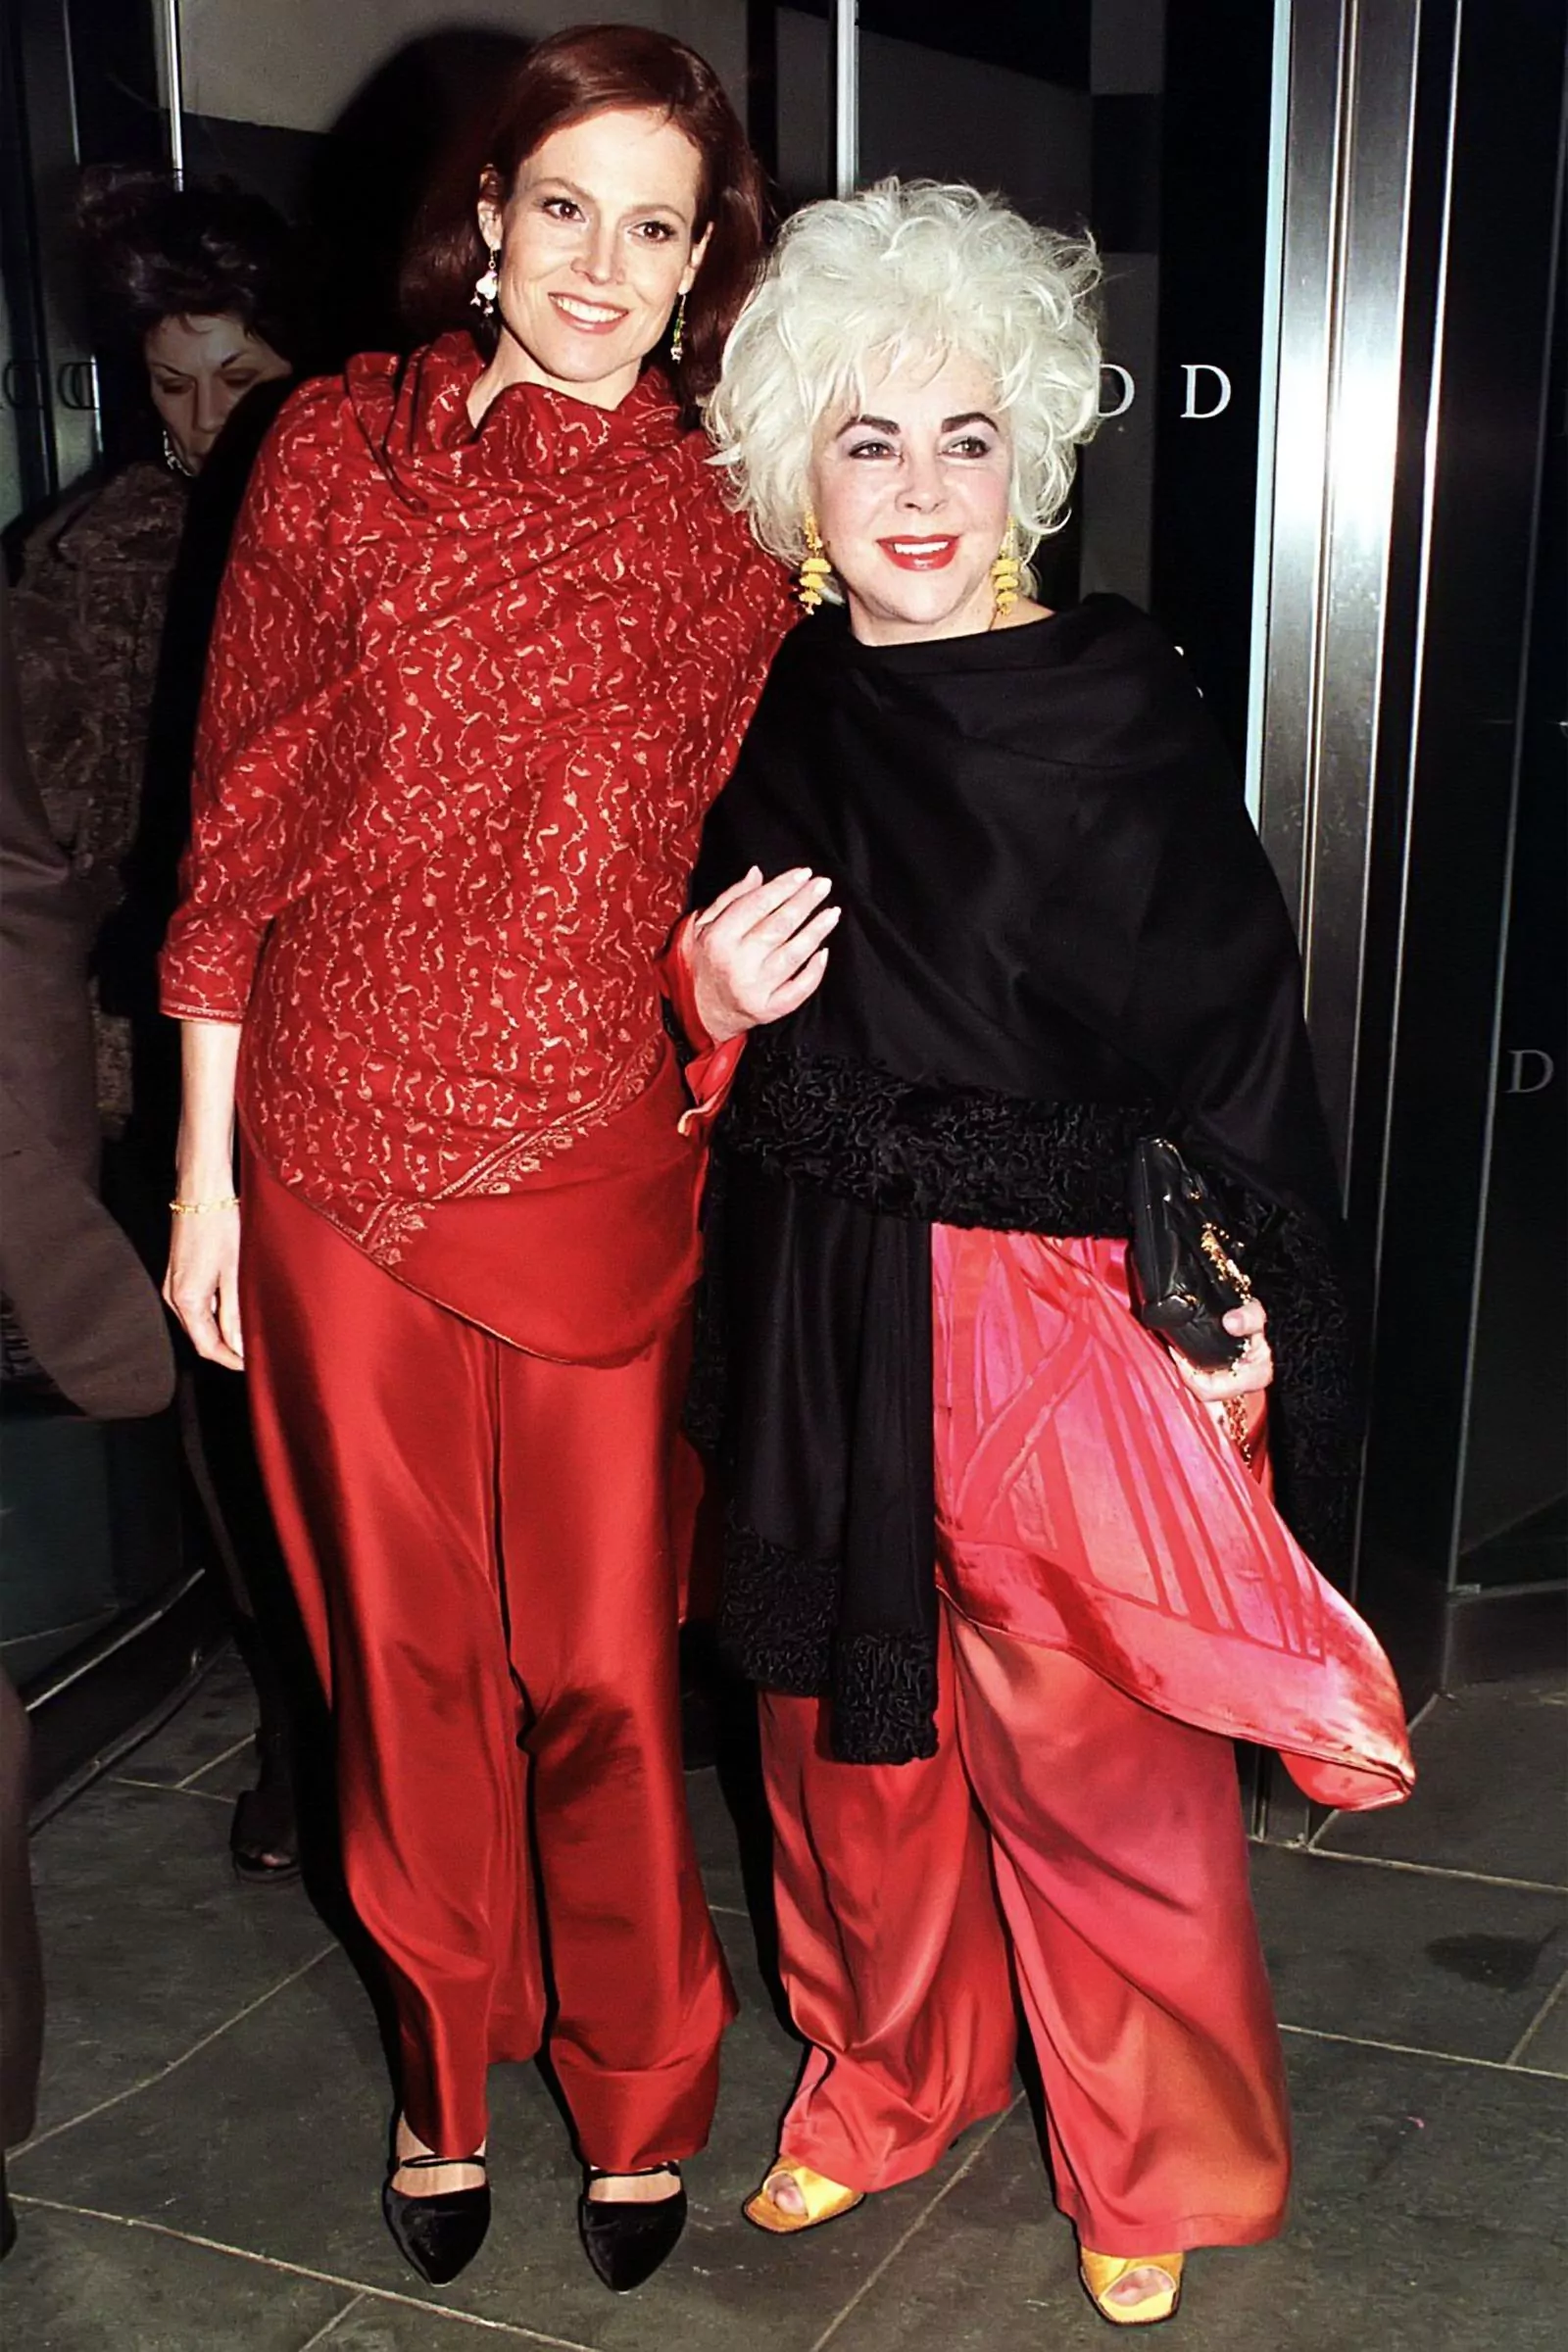 Elizabeth Taylor and Sigourney Weaver at Christie's auction in aid of amfAR, March 15, 1999.